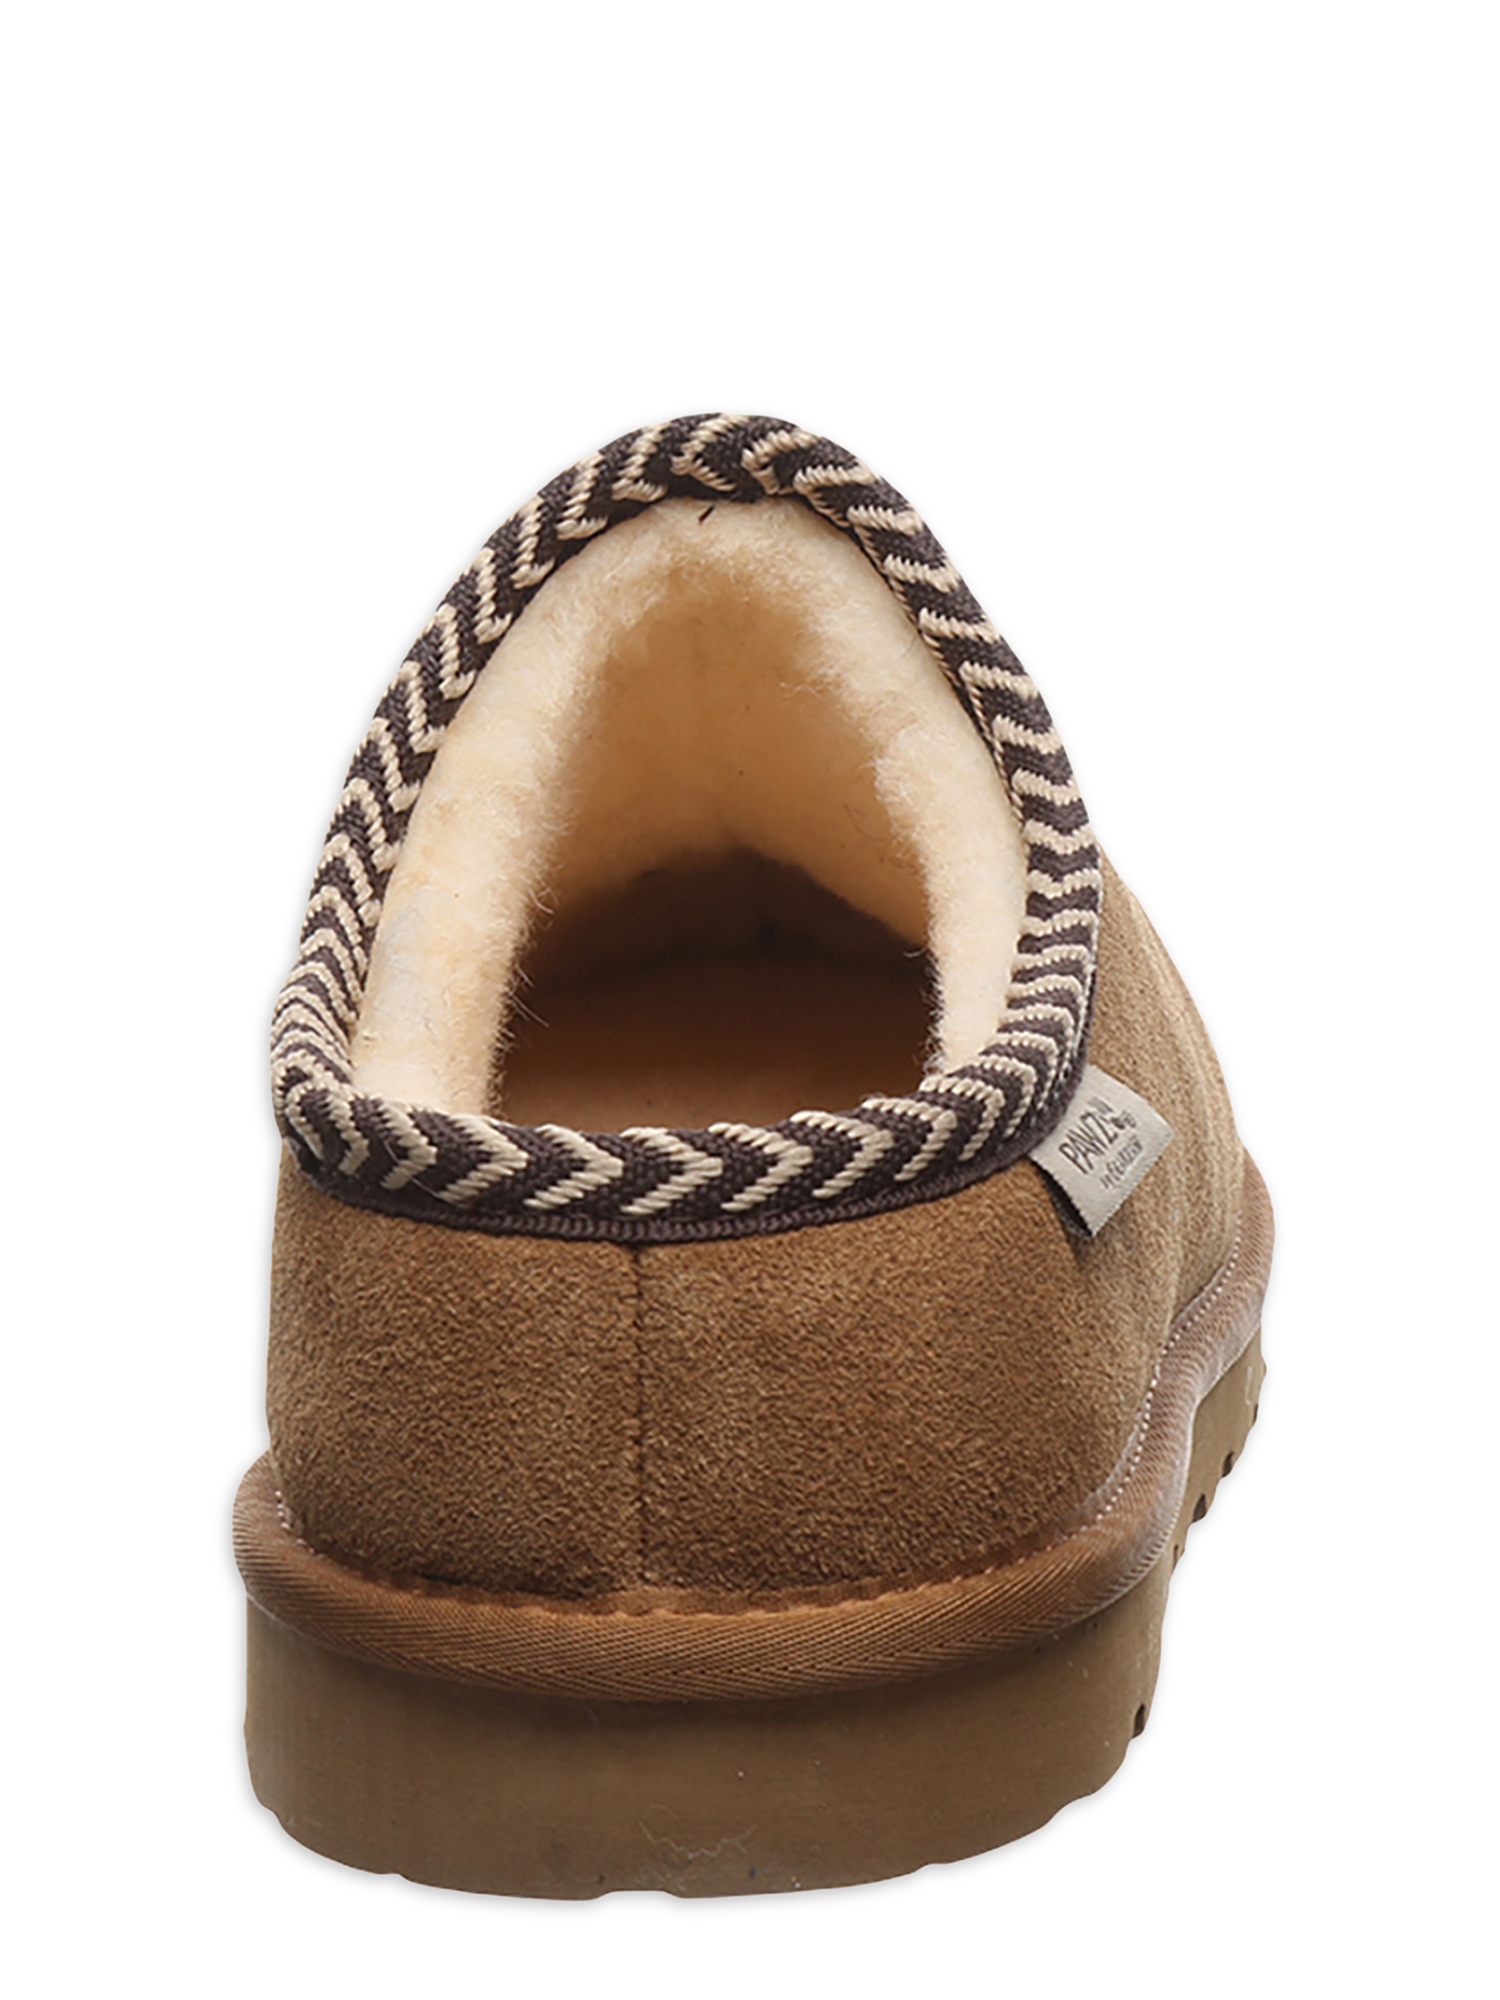 Pawz by Bearpaw Men's Genuine Suede Kevin Slipper Clogs - image 4 of 5